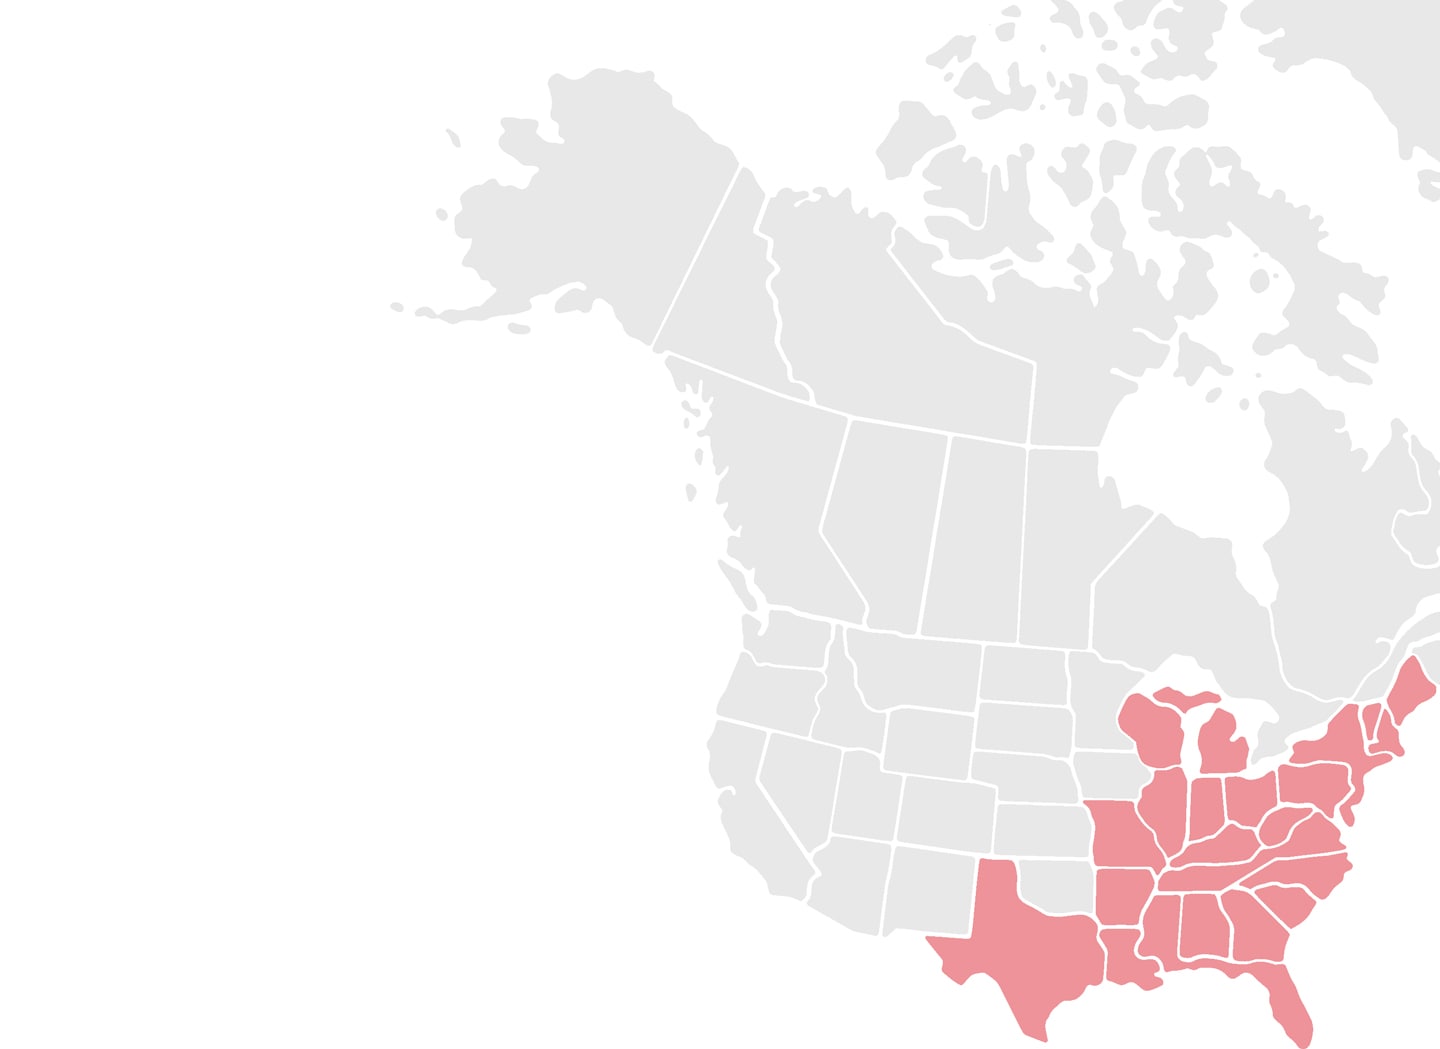 East Region highlighted in red